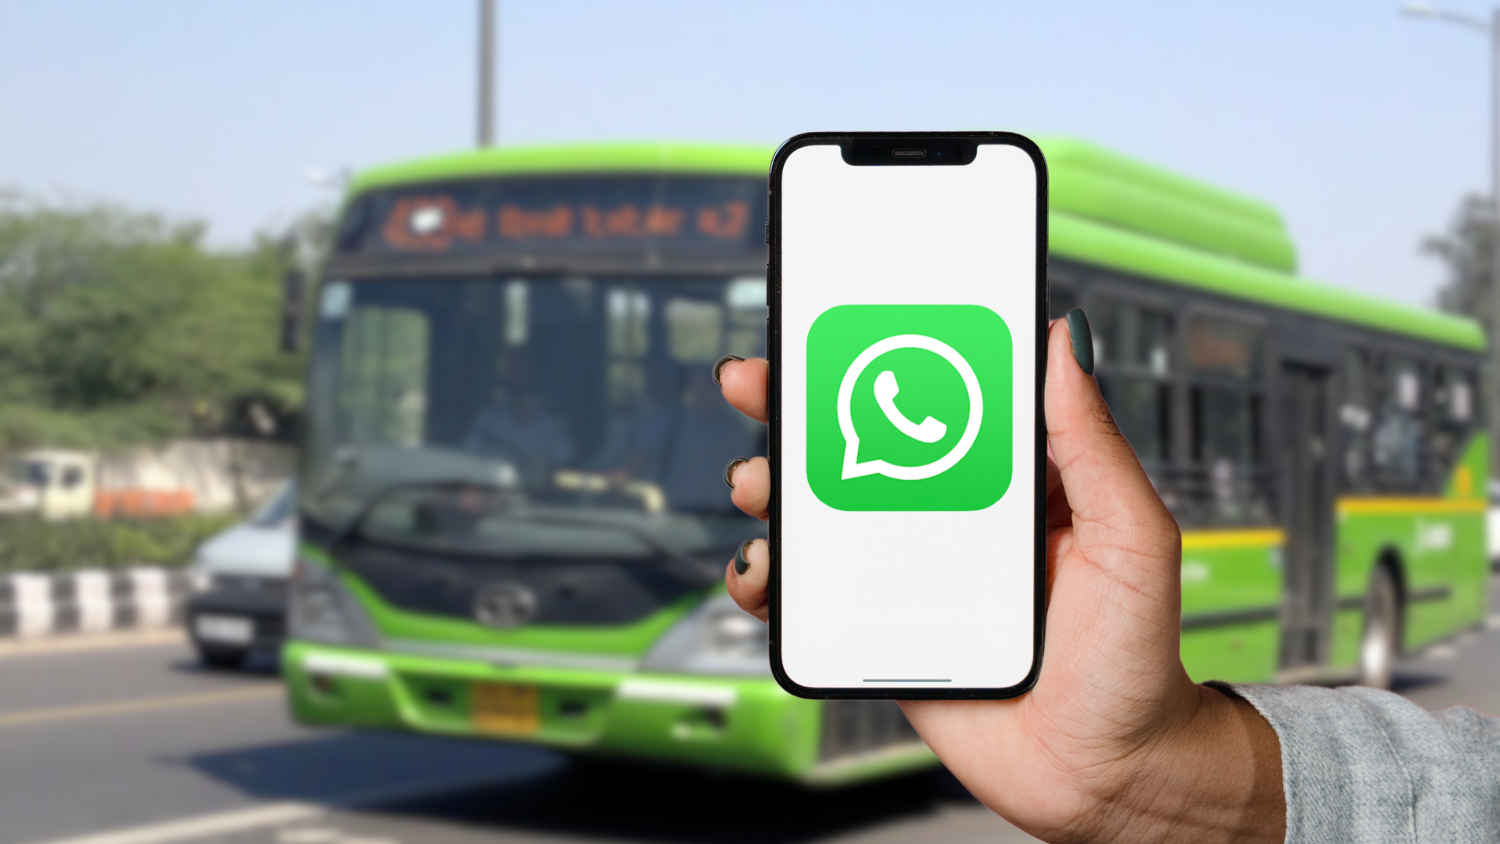 Book your DTC bus tickets via WhatsApp: Here’s how